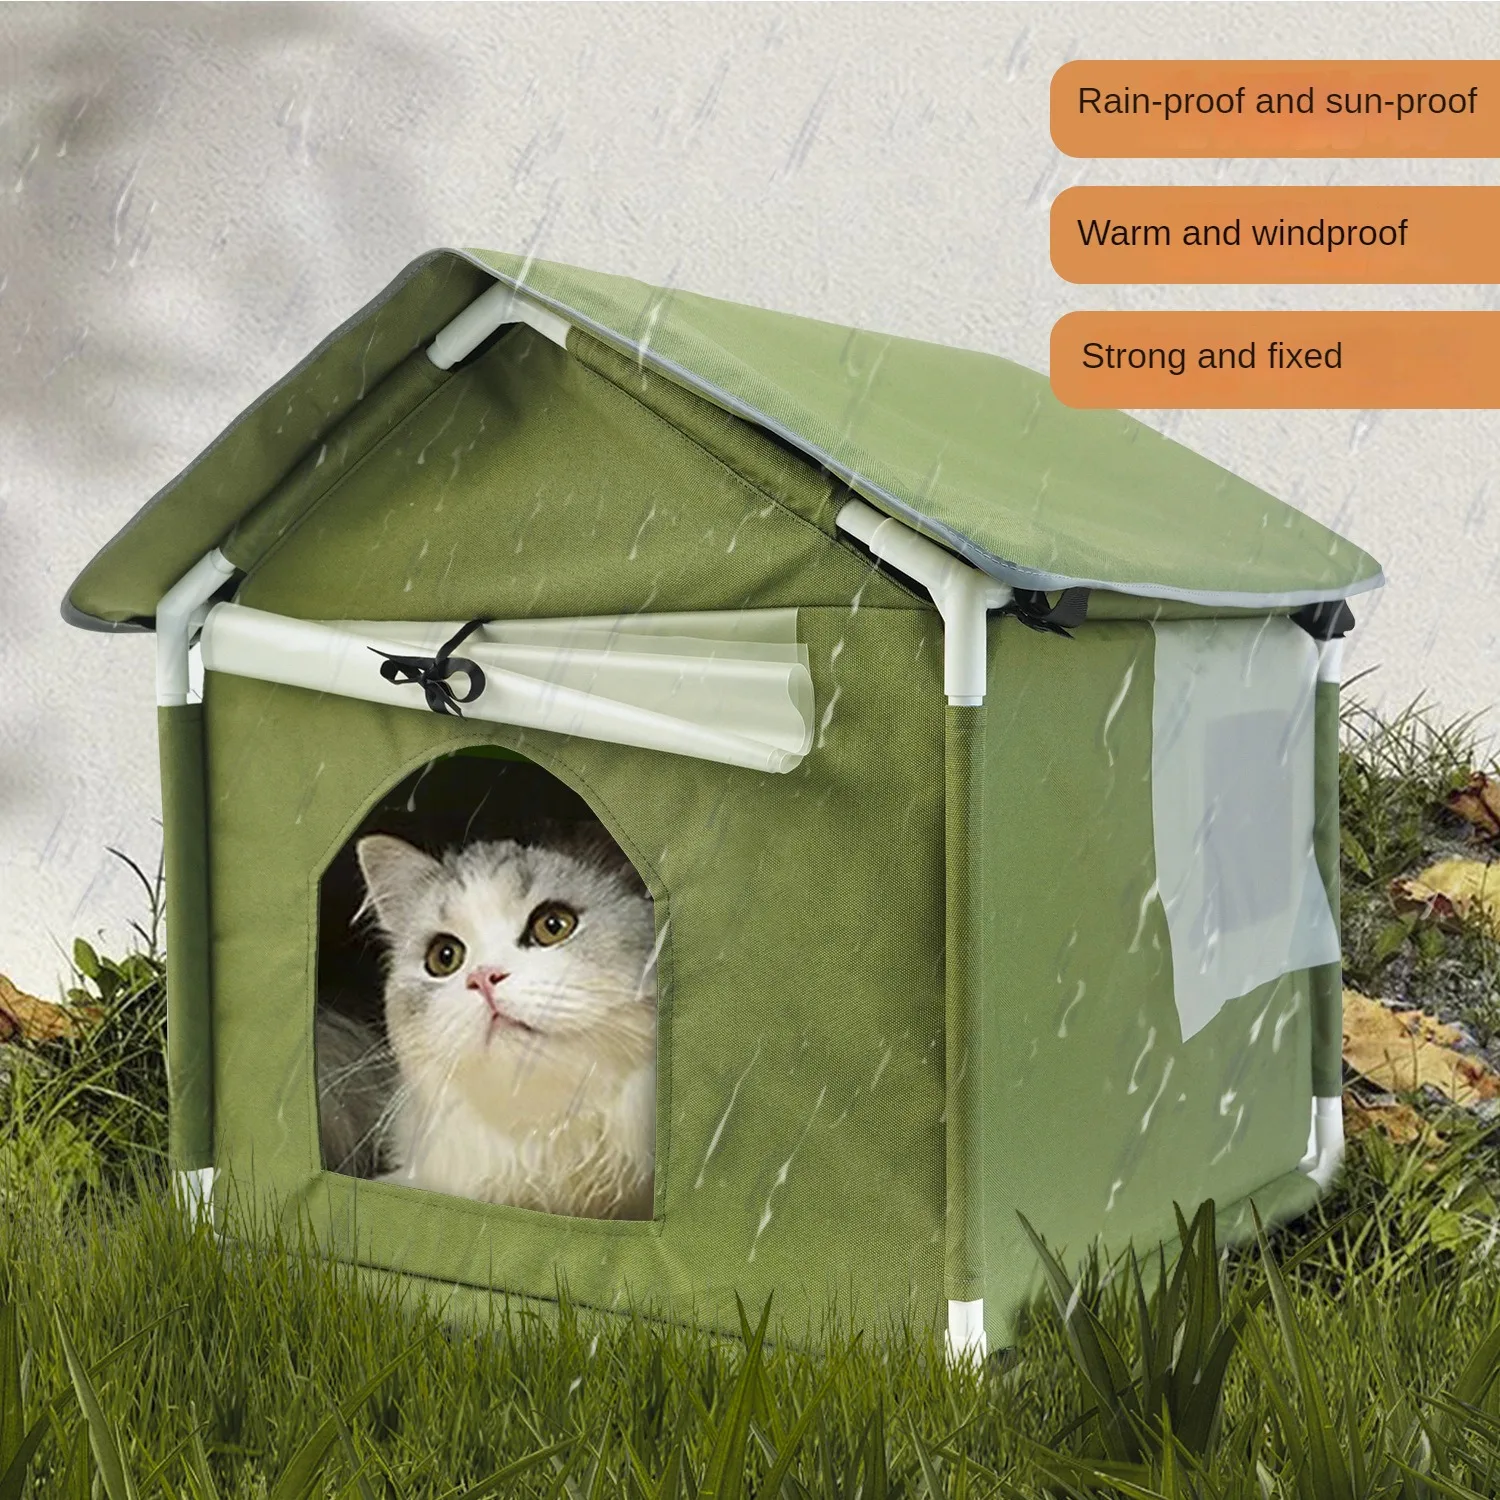 

Spacious Outdoor Cat Shelter for All Seasons: Rainproof and Sunproof Pet House for Stray Cats and Kittens